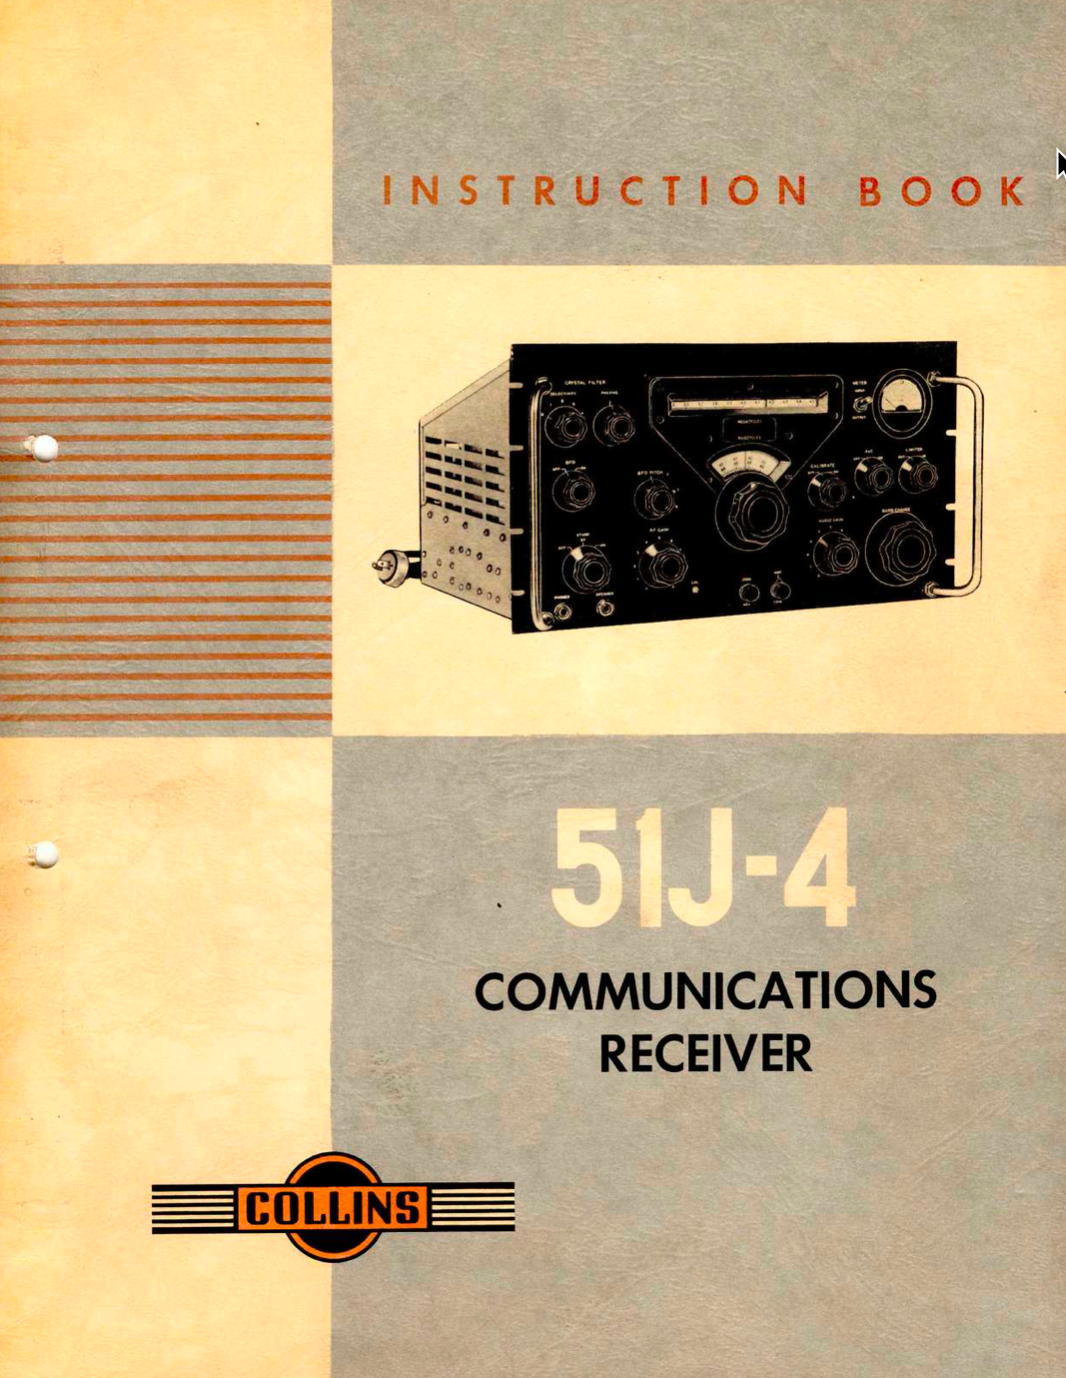 Collins 51J-4 Communications Receiver - Instruction Manual (2nd Edition 1955)